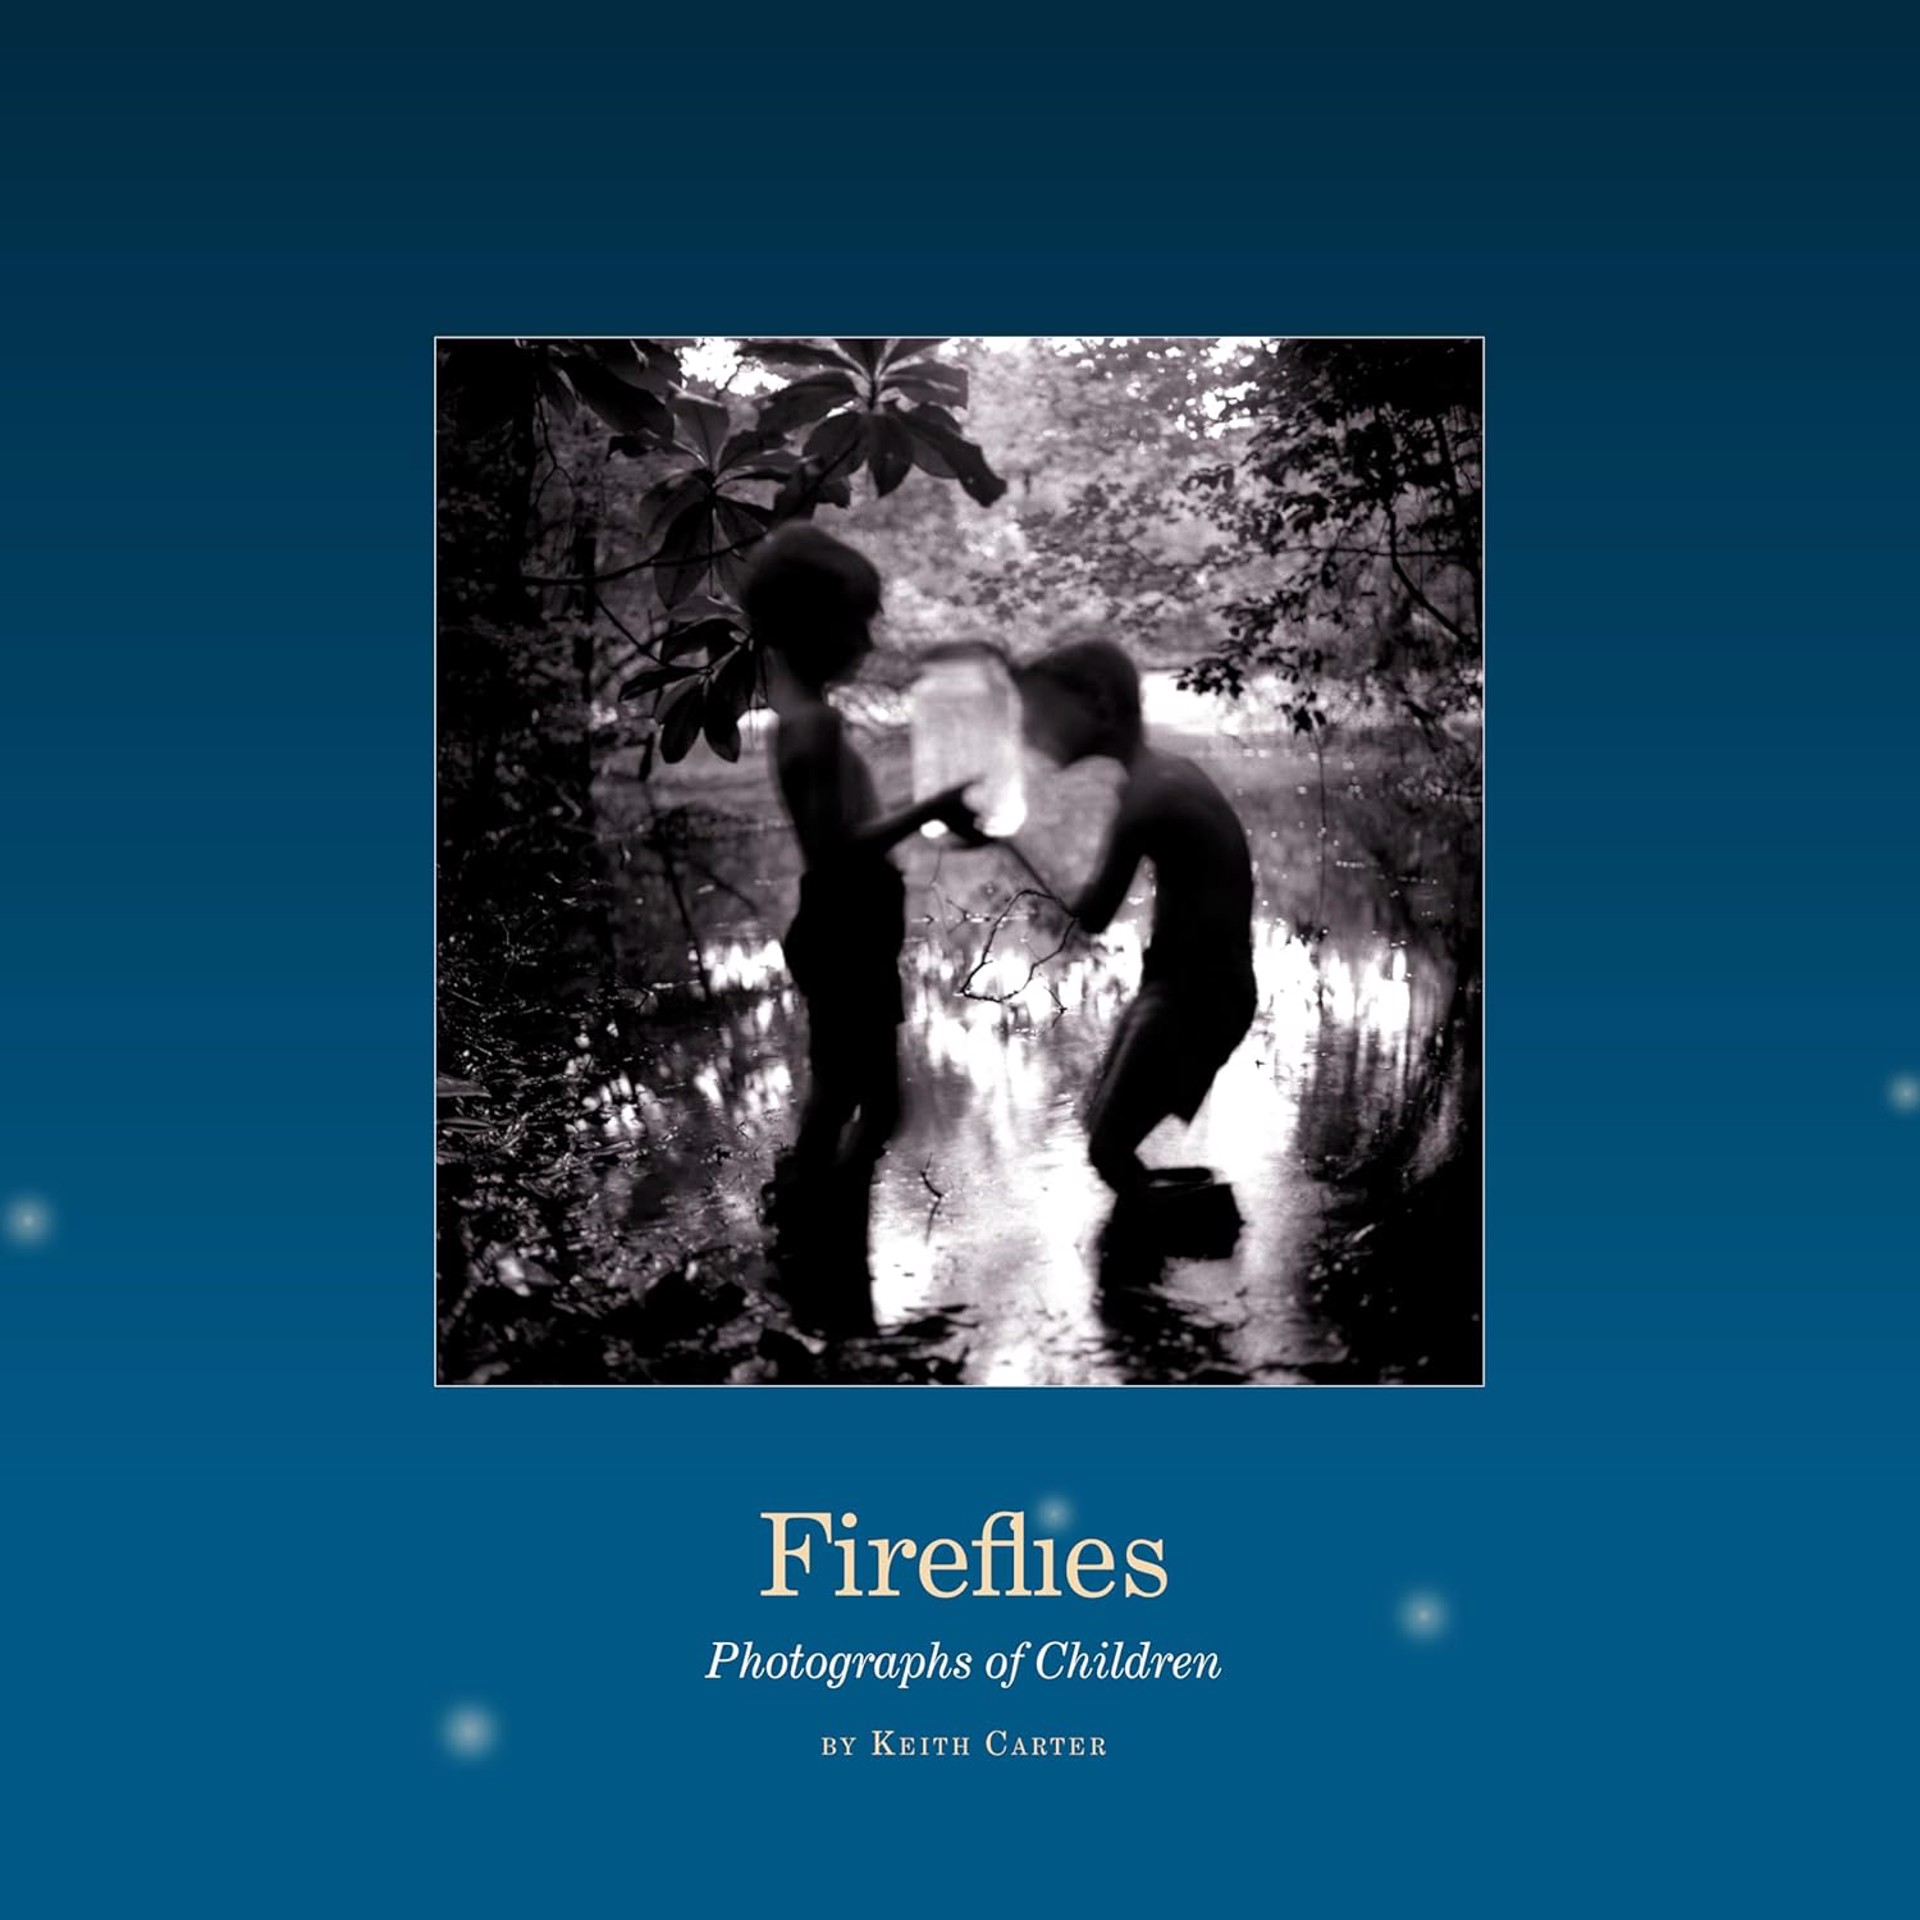 Fireflies Photographs of Children, Keith Carter by Publications